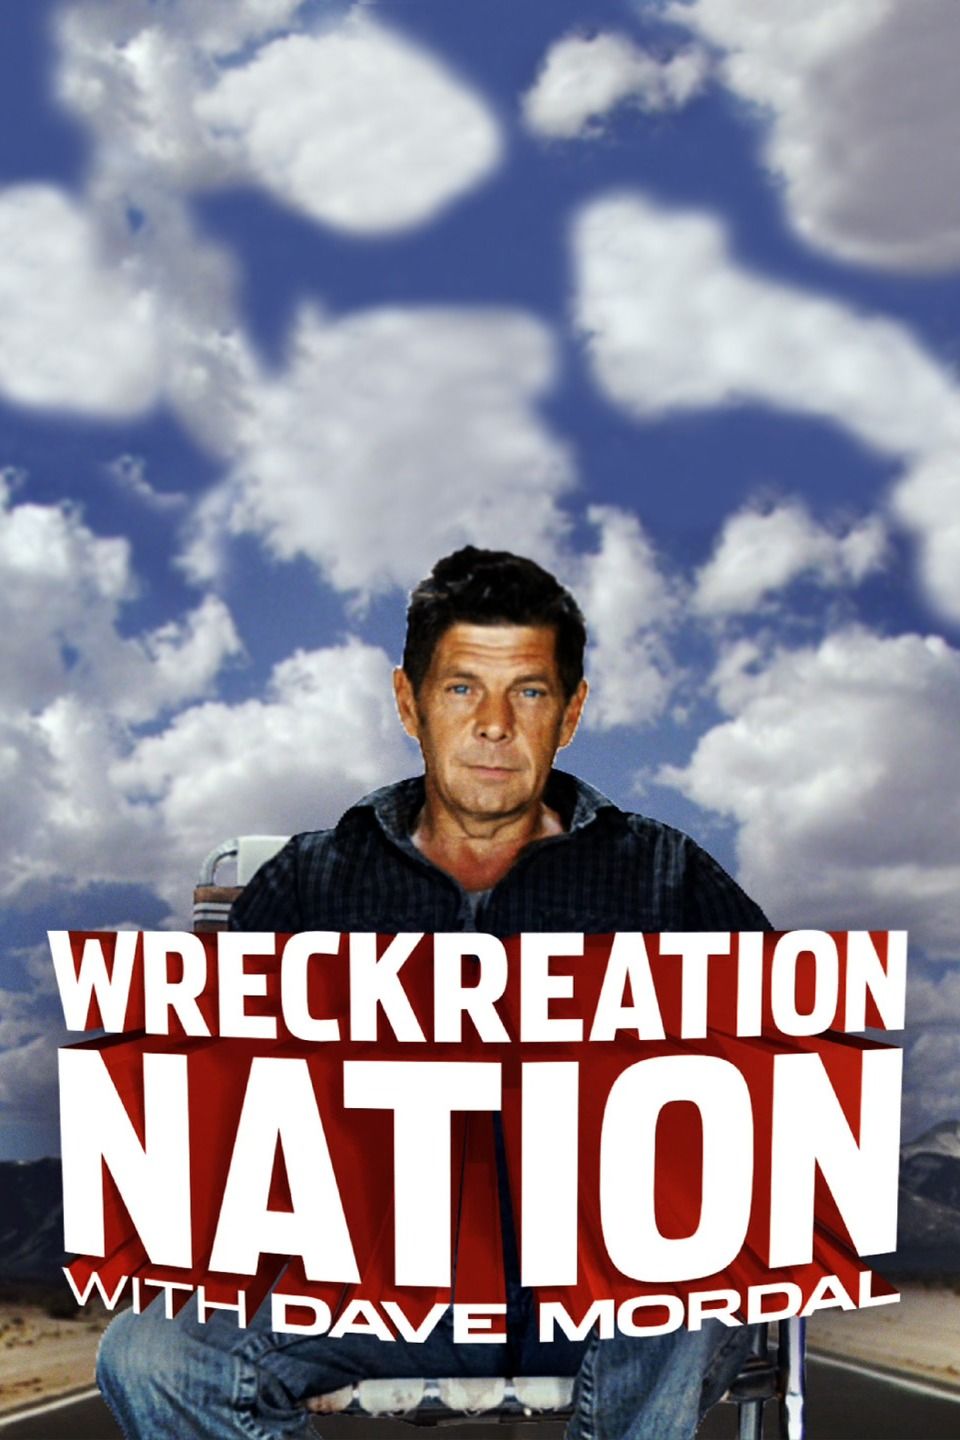 Wreckreation Nation